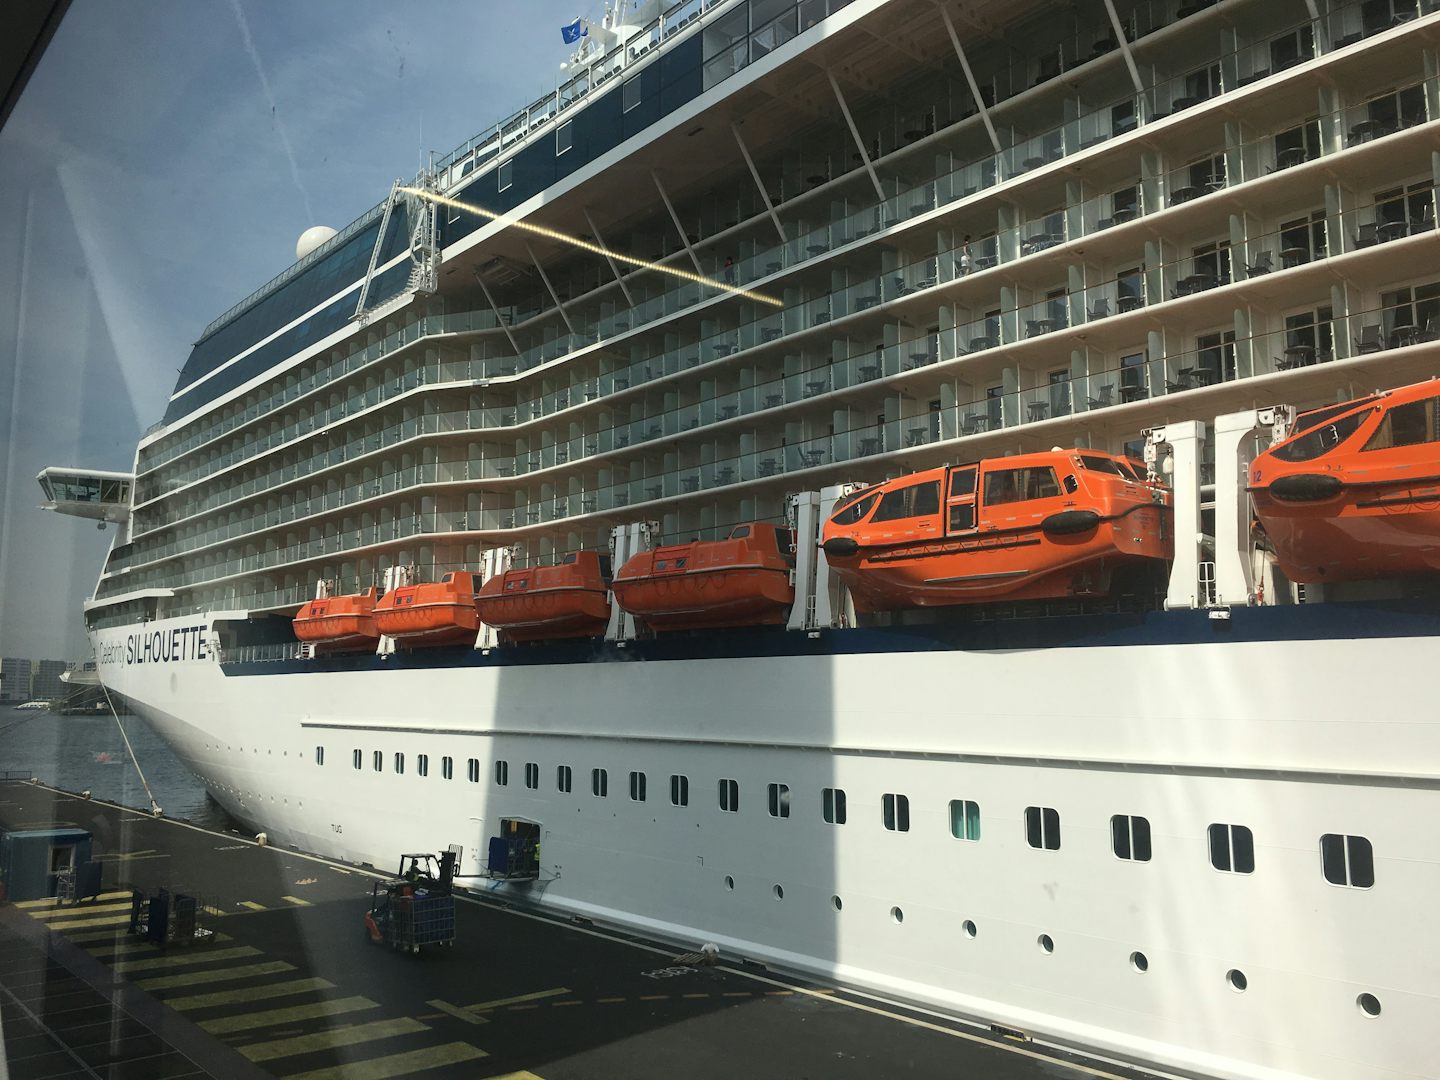 Celebrity Silhouette at Amsterdam Cruise Port